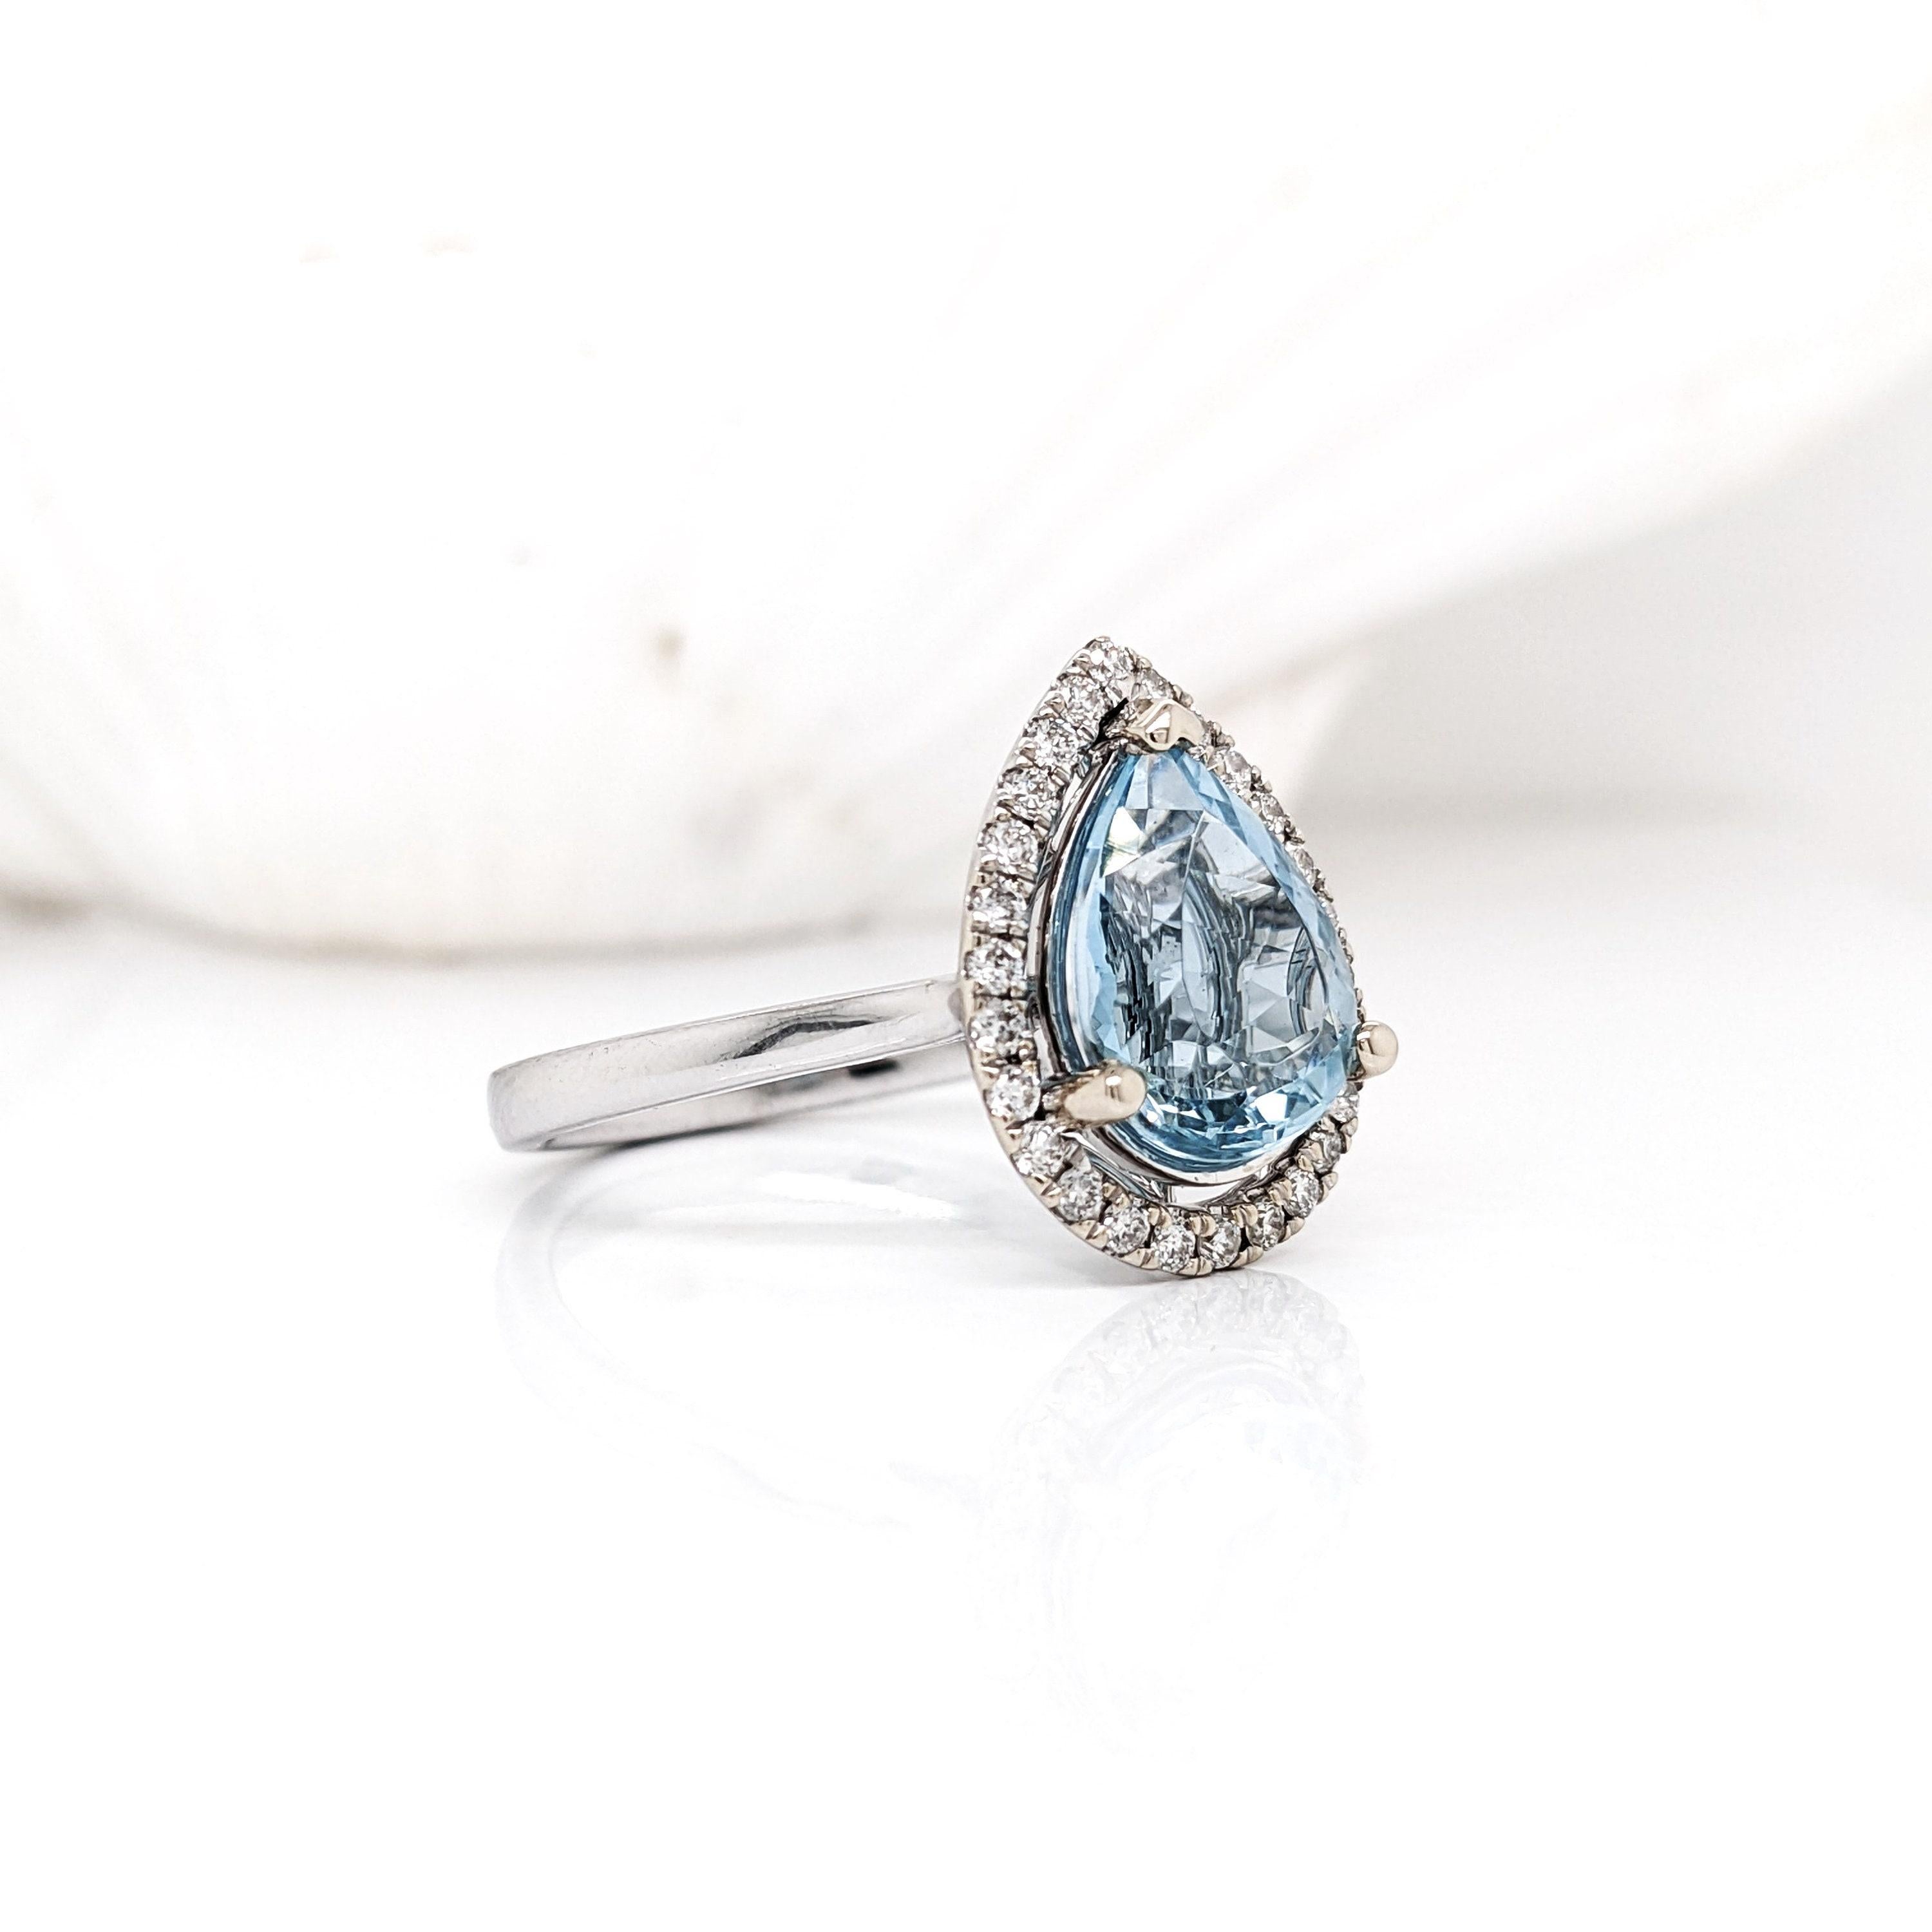 This beautiful ring features a teardrop sparkling Aquamarine in 14k white gold with a lovely halo of round natural diamonds. A statement ring design perfect for an eye catching engagement or anniversary. This ring also makes a beautiful birthstone